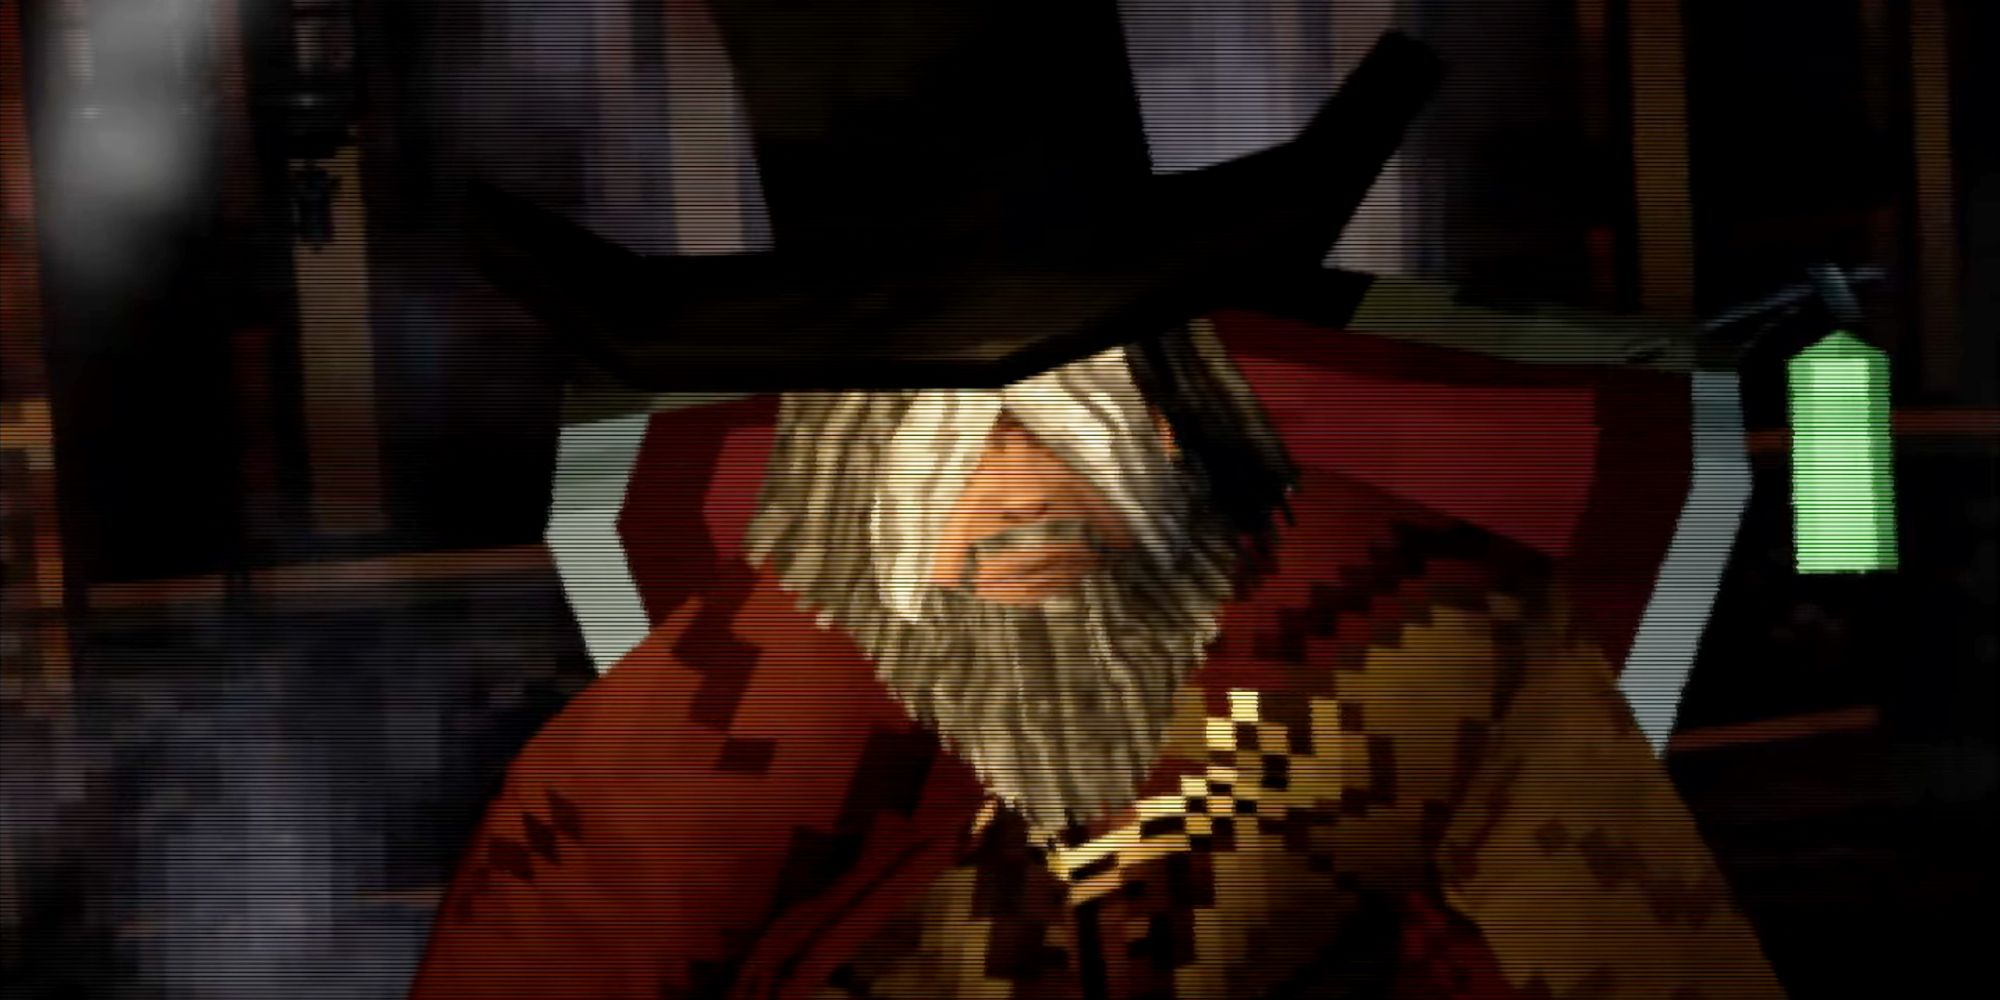 Bloodborne' PS1 demake shows off grizzly Father Gascoigne fight